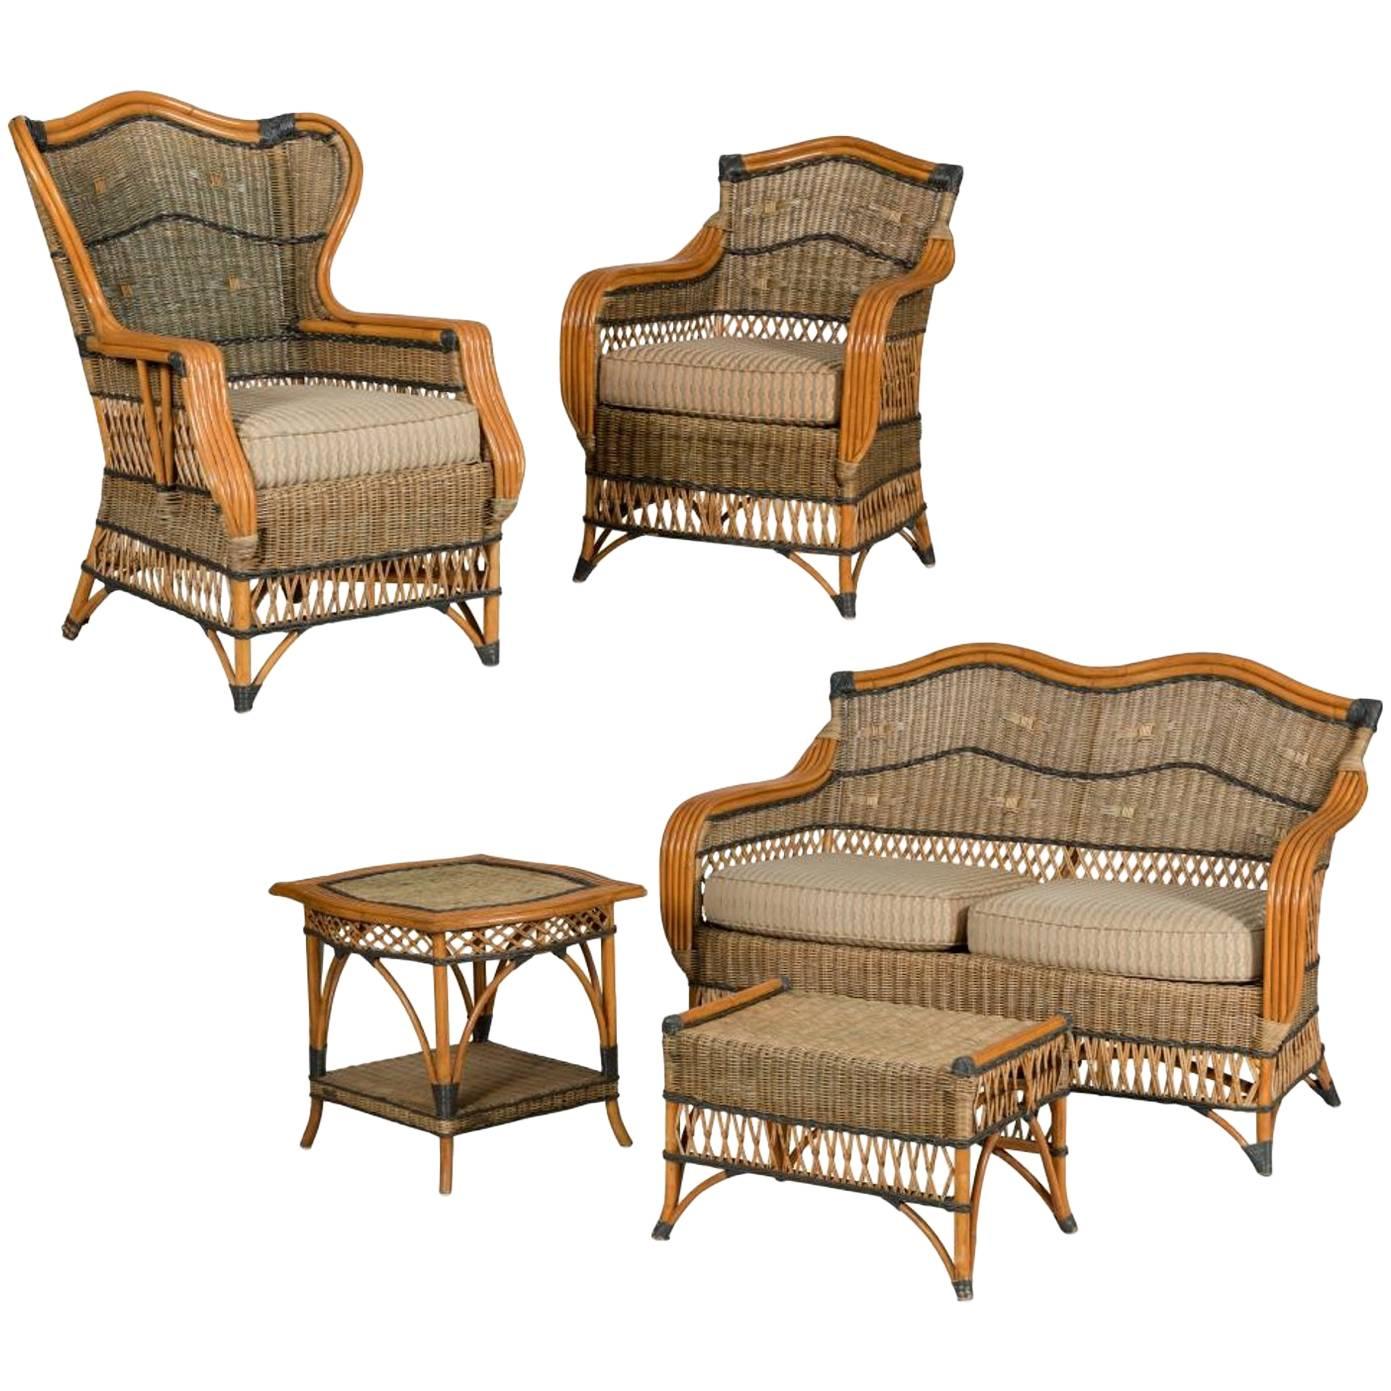 Beautiful  French Vintage Five-Piece Wicker Porch Set by Grange